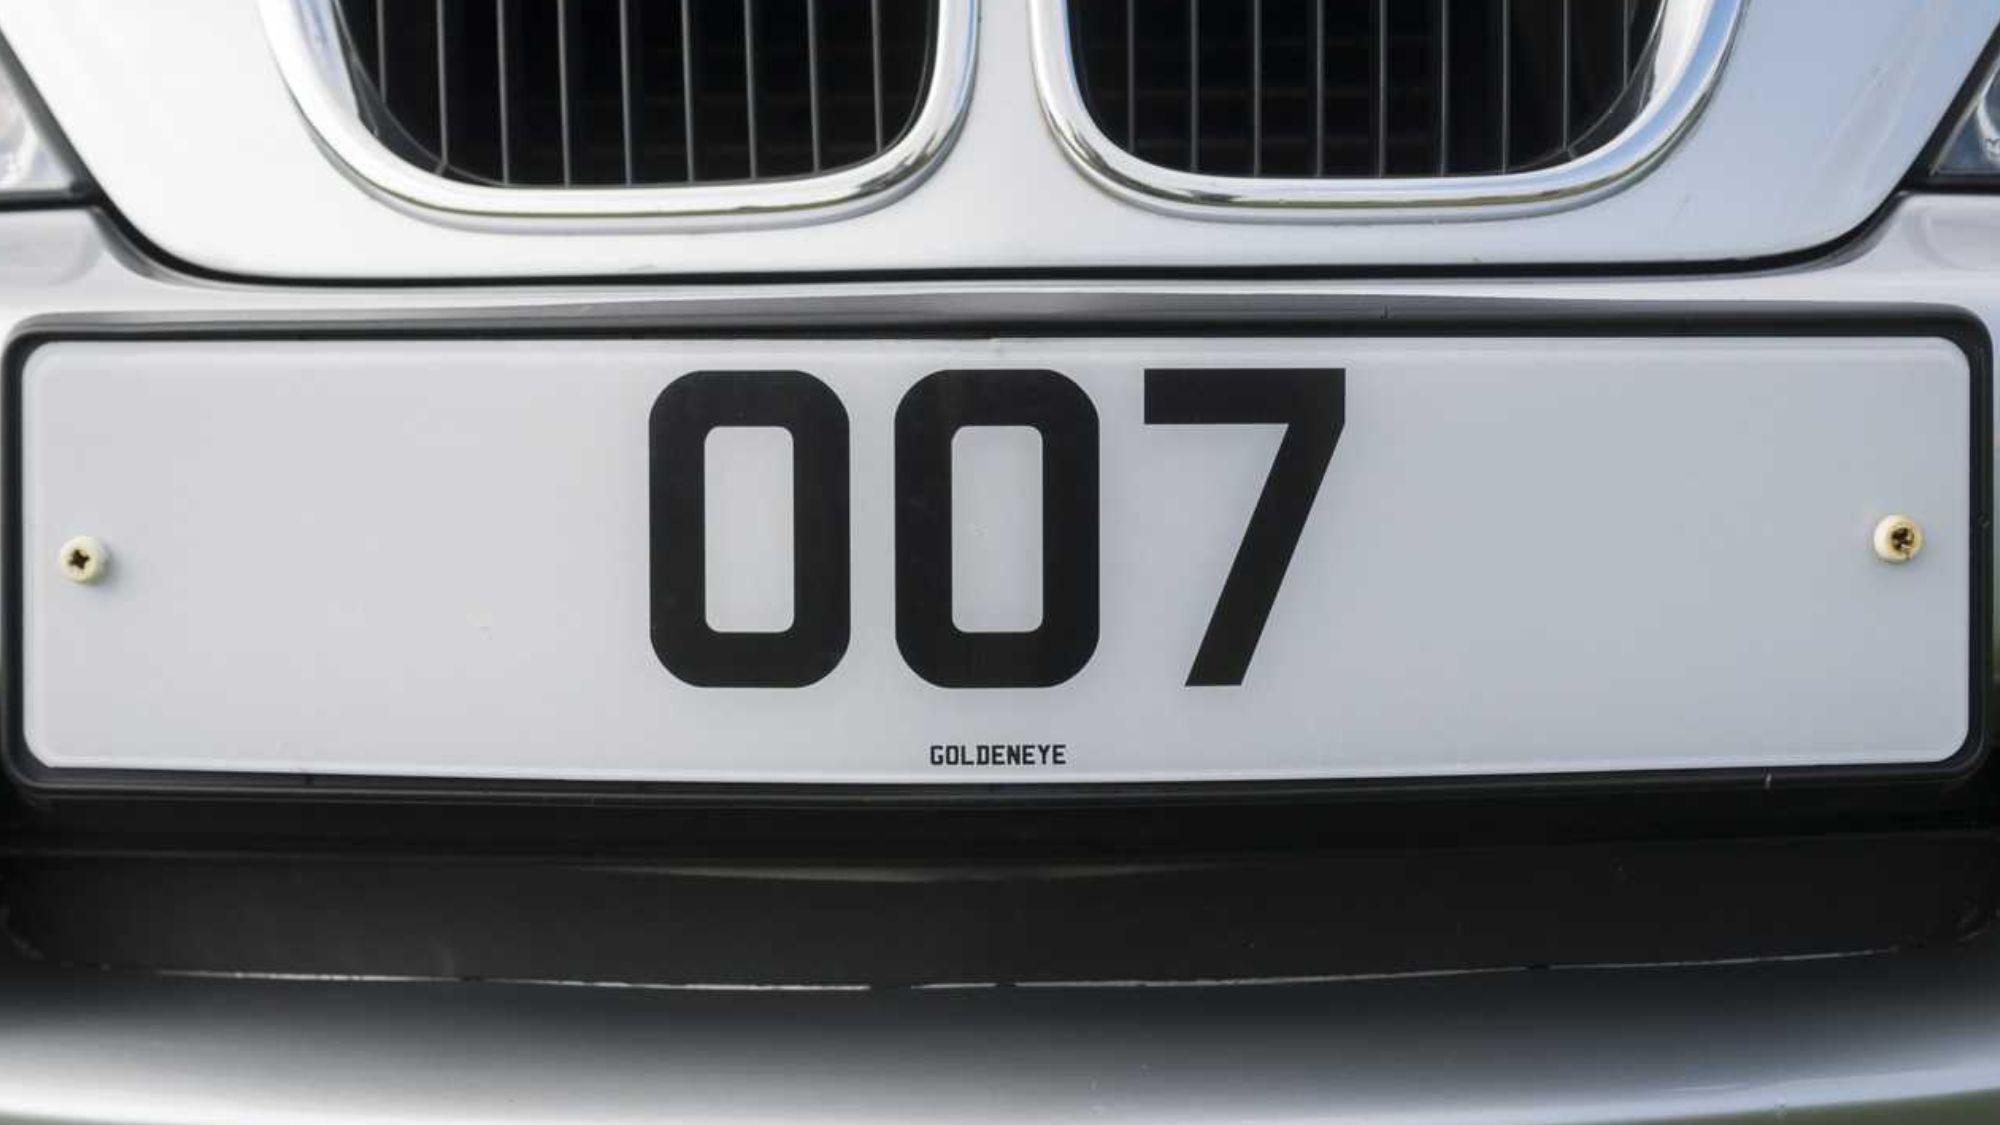 007 license plate for BMW showing private number plates for modern cars